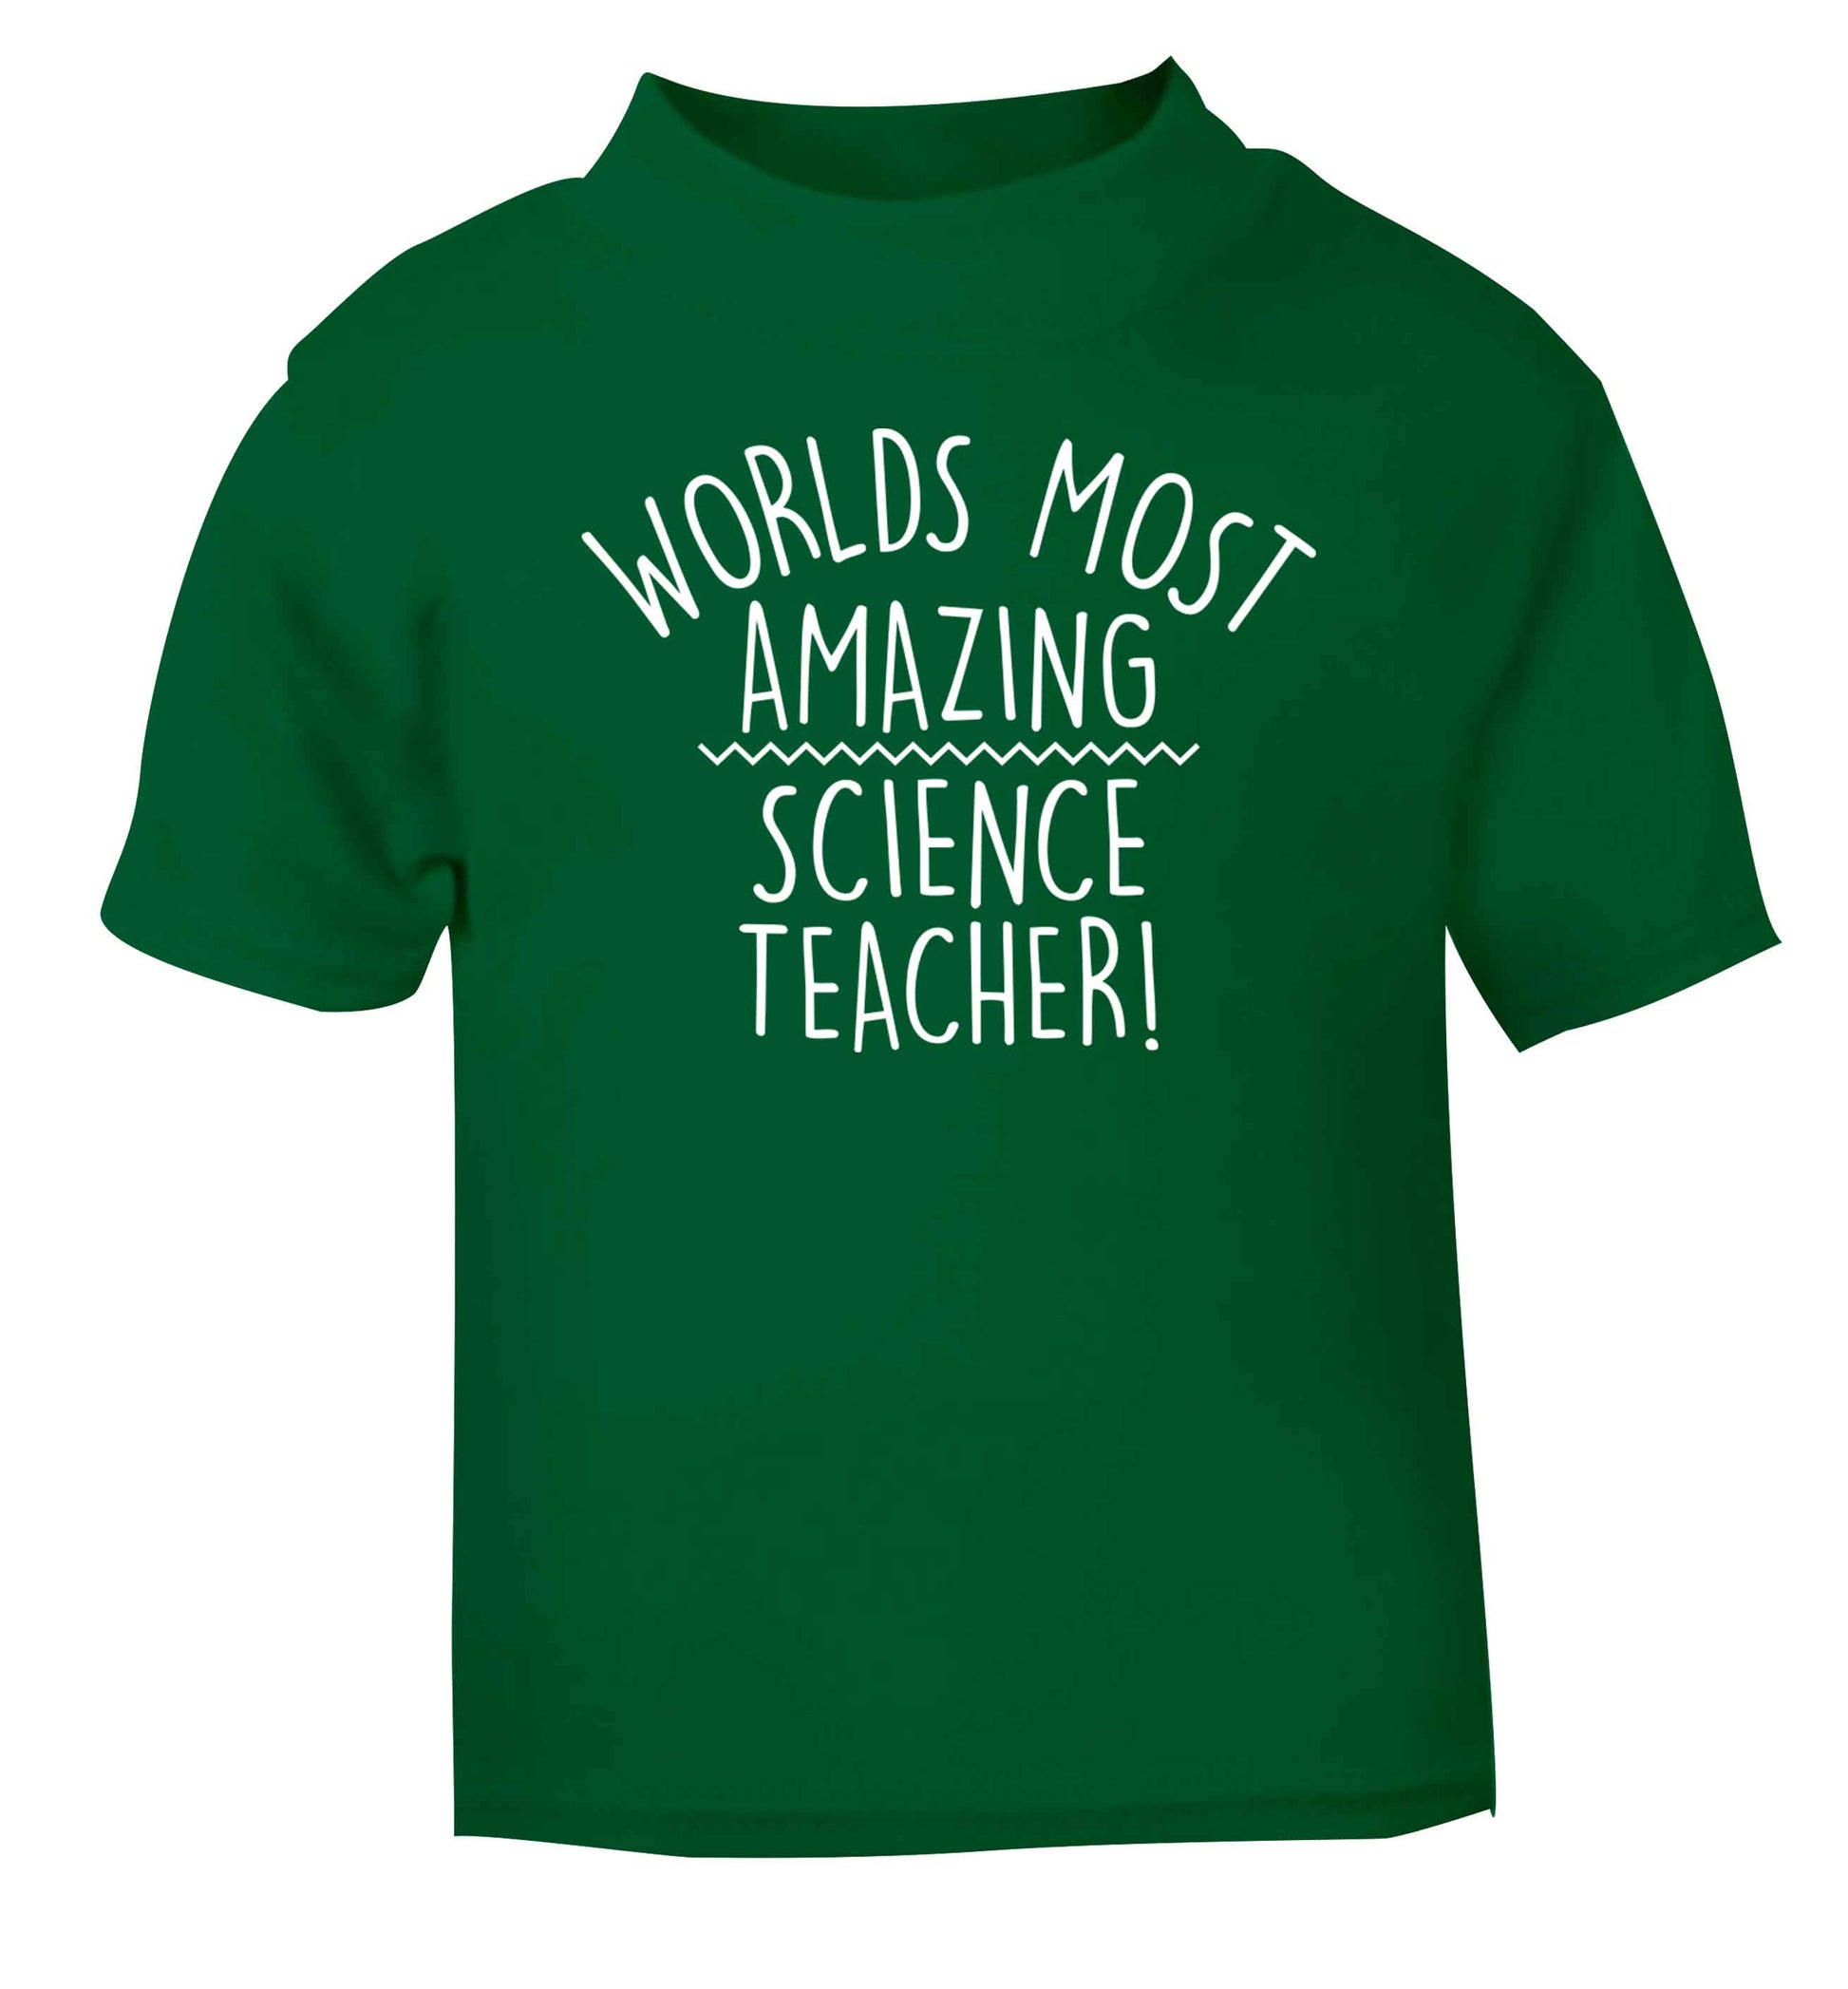 Worlds most amazing science teacher green baby toddler Tshirt 2 Years